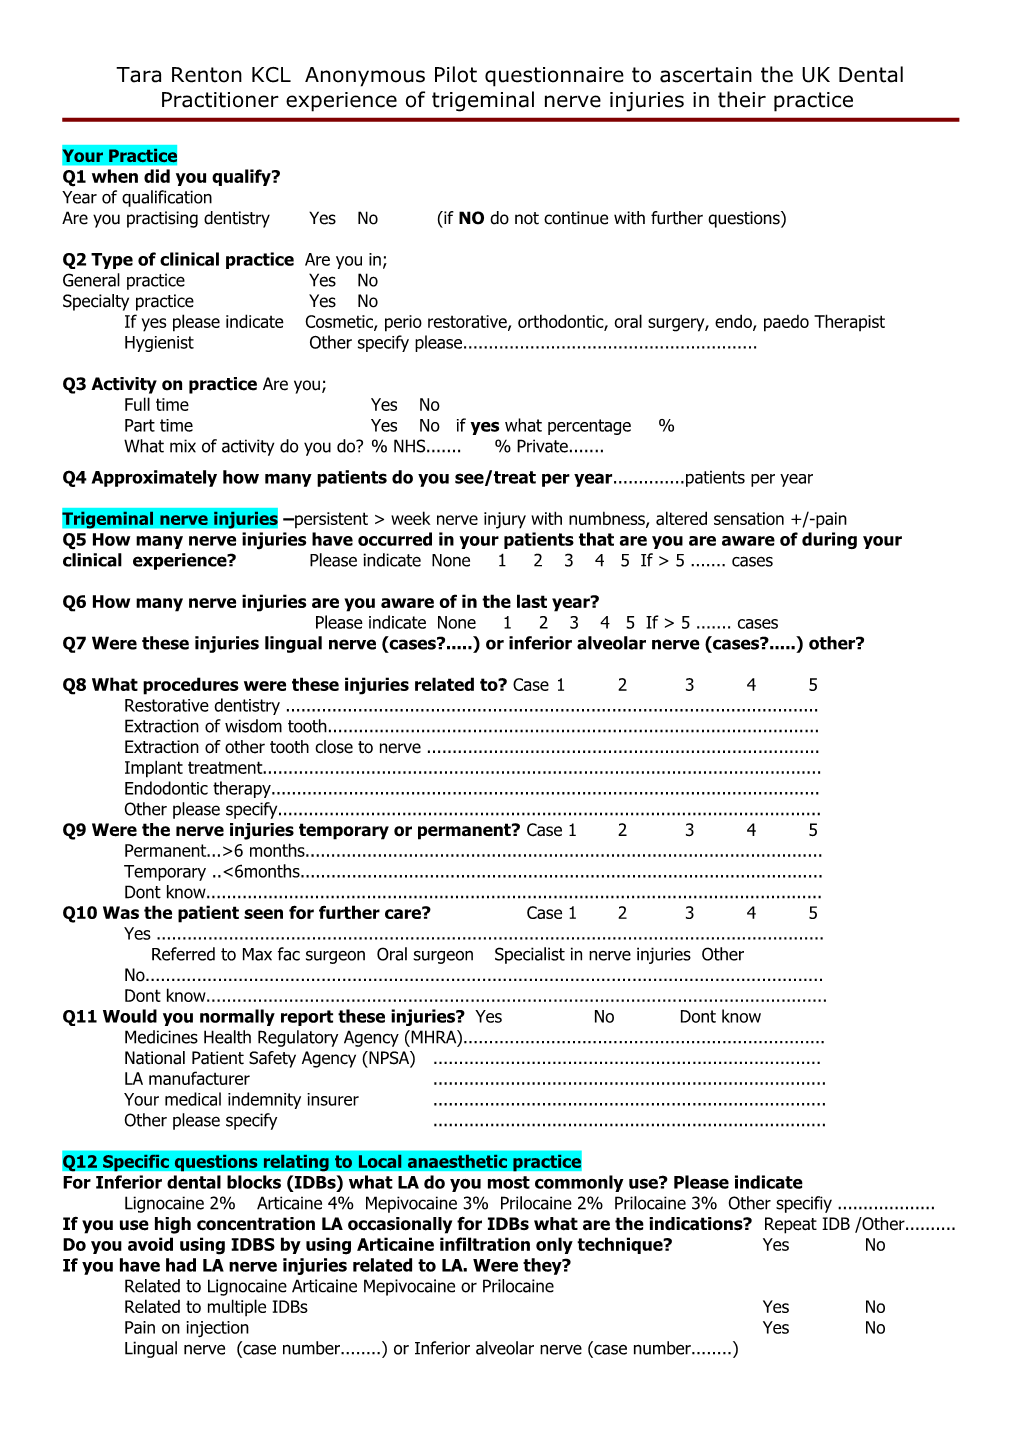 Tara Renton KCL Anonymous Pilot Questionnaire to Ascertain the UK Dental Practitioner Experience